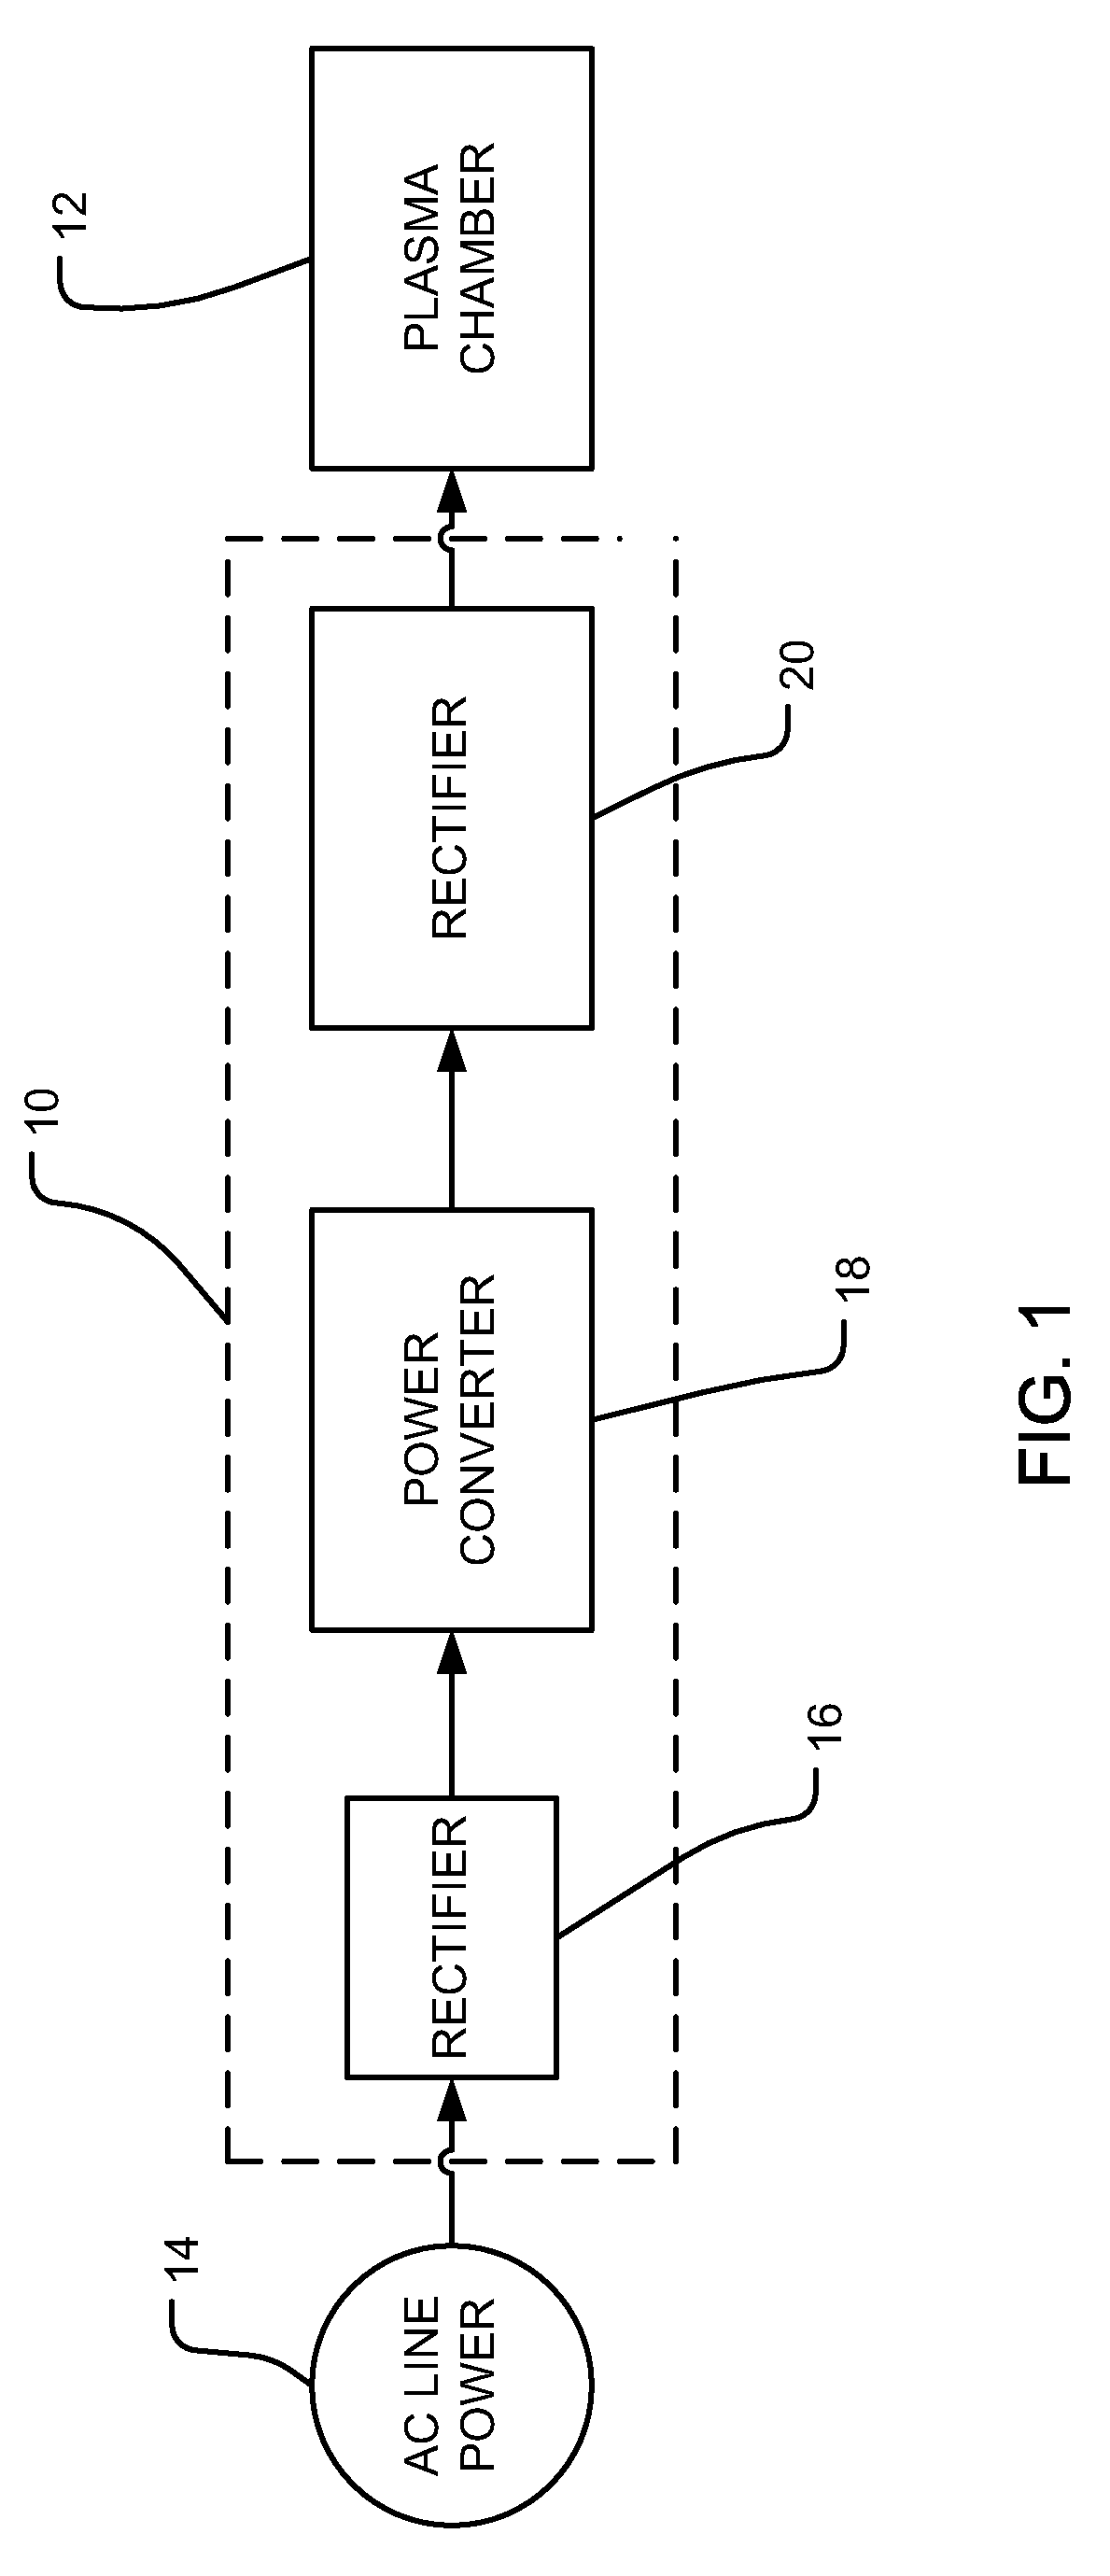 Protection method, system and apparatus for a power converter